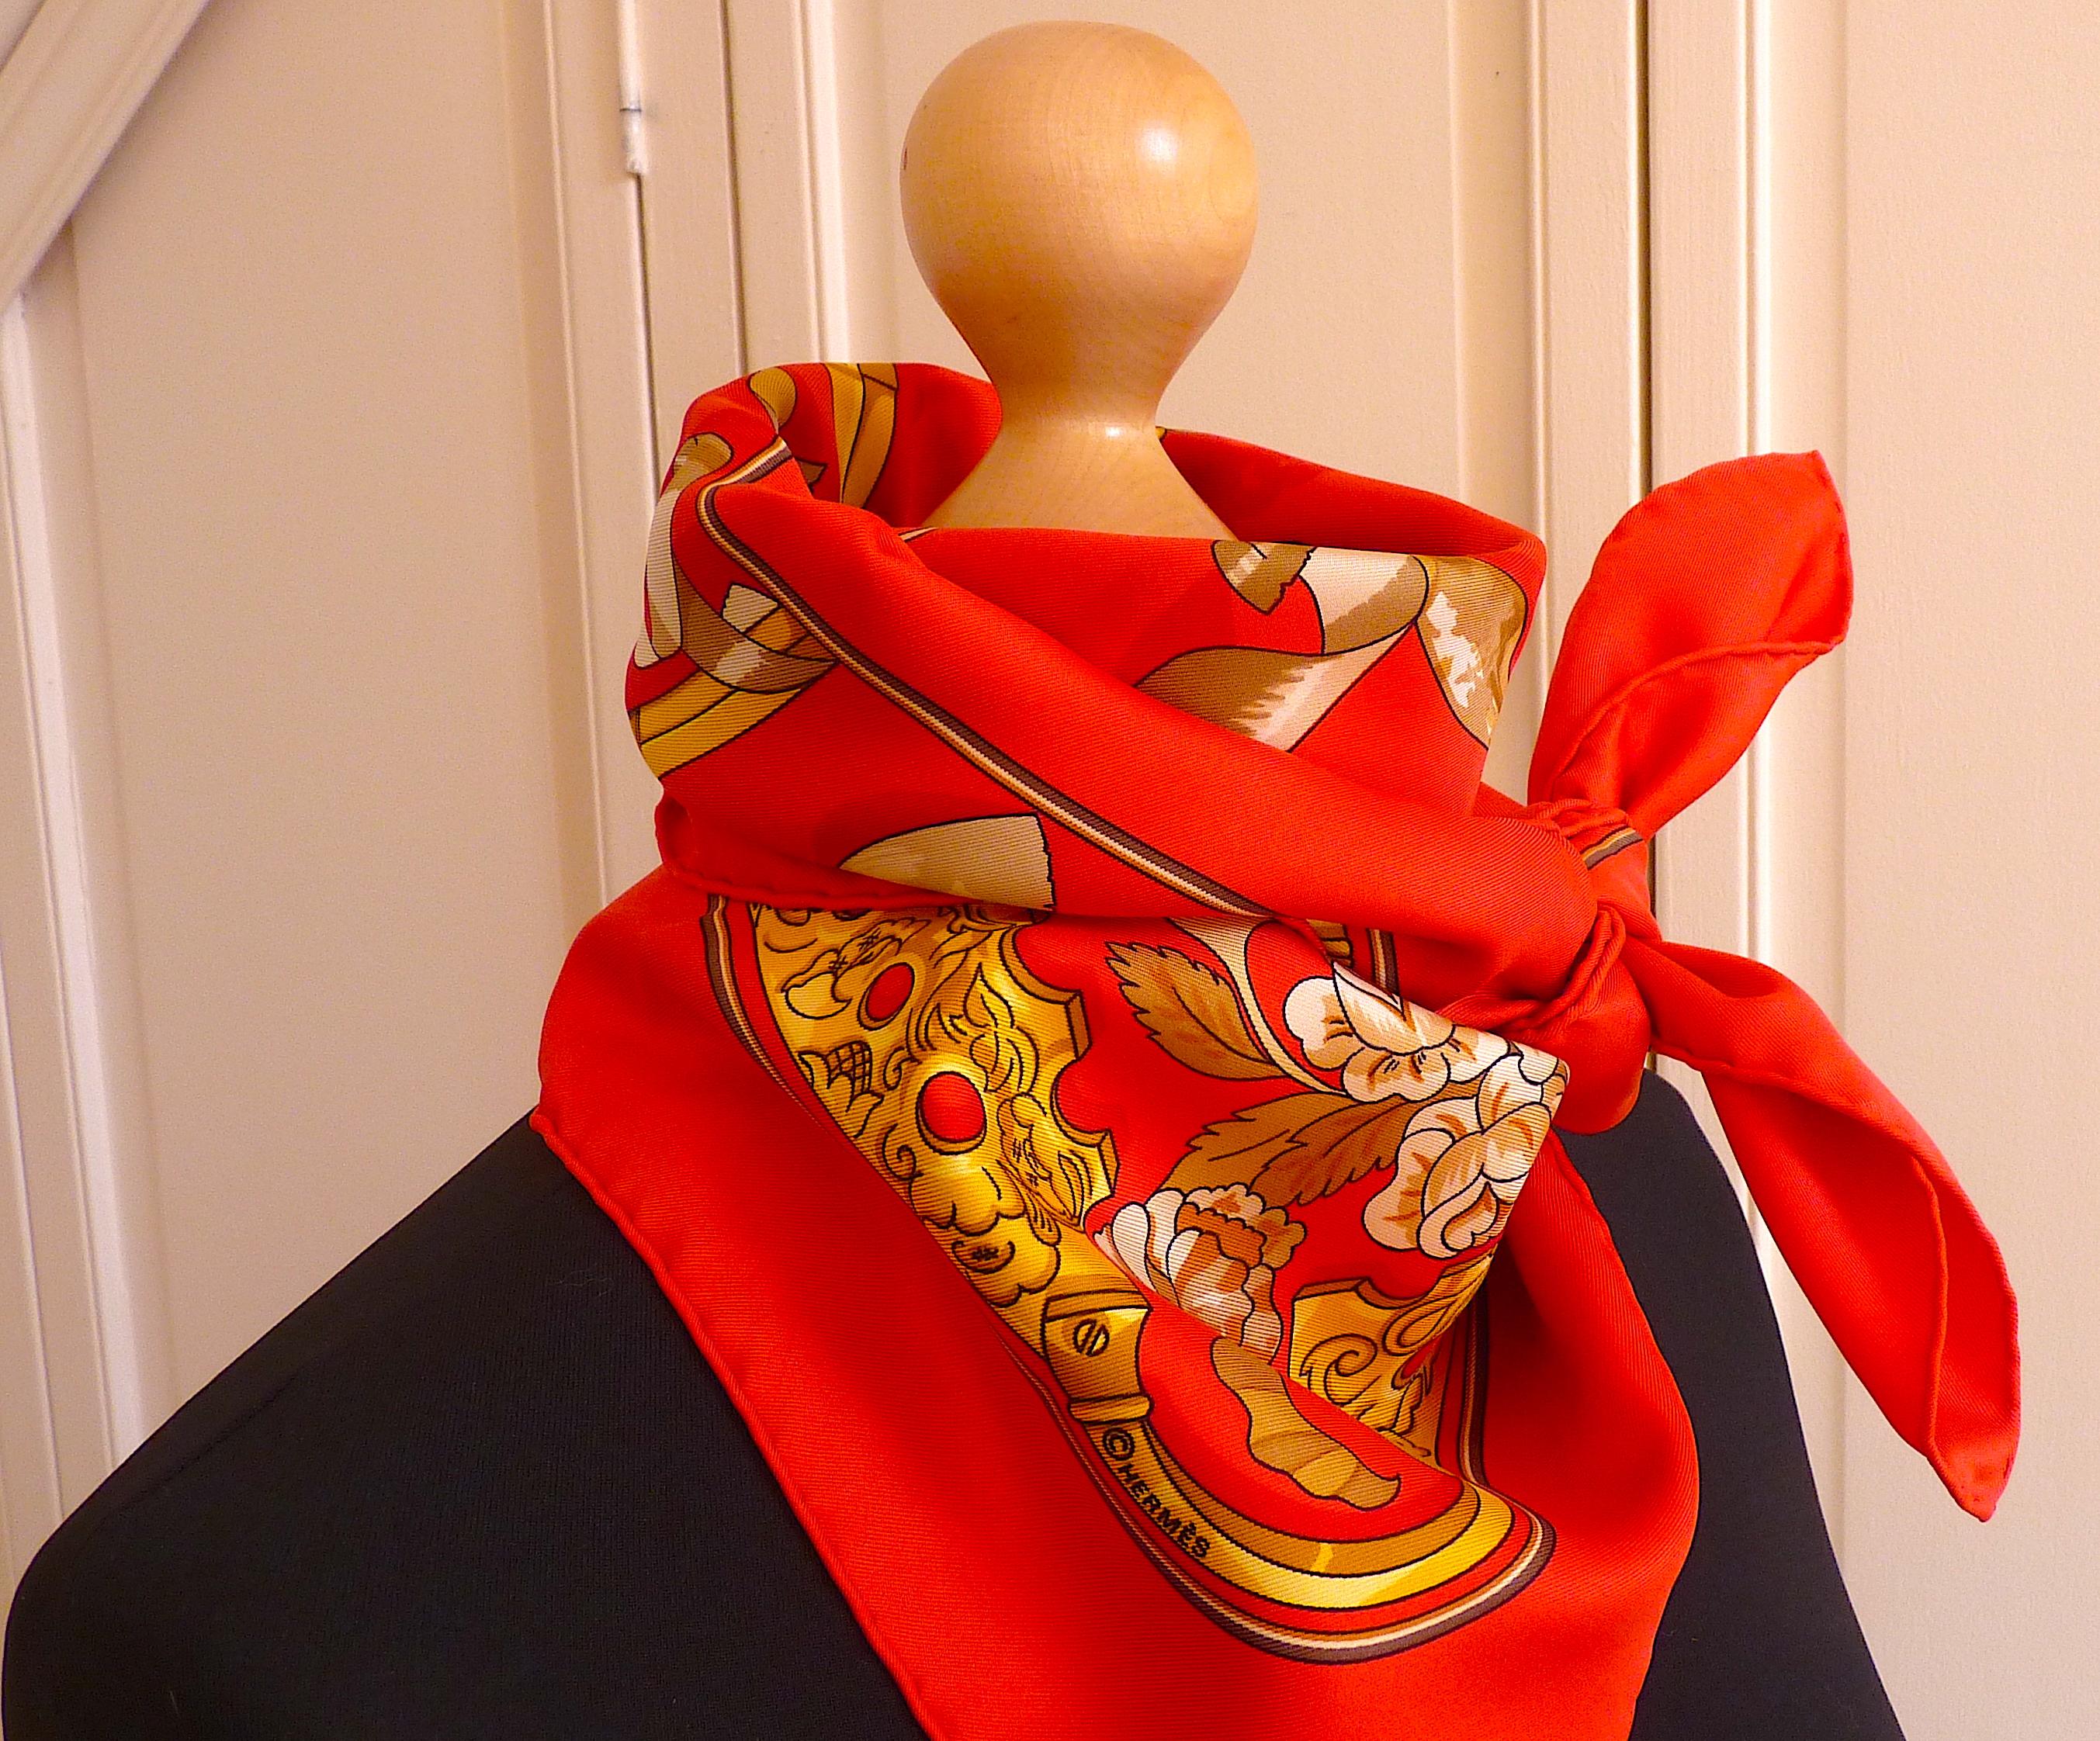 HERMES Silk Scarf Copeaux by Caty Latham, Issued in 1998 2